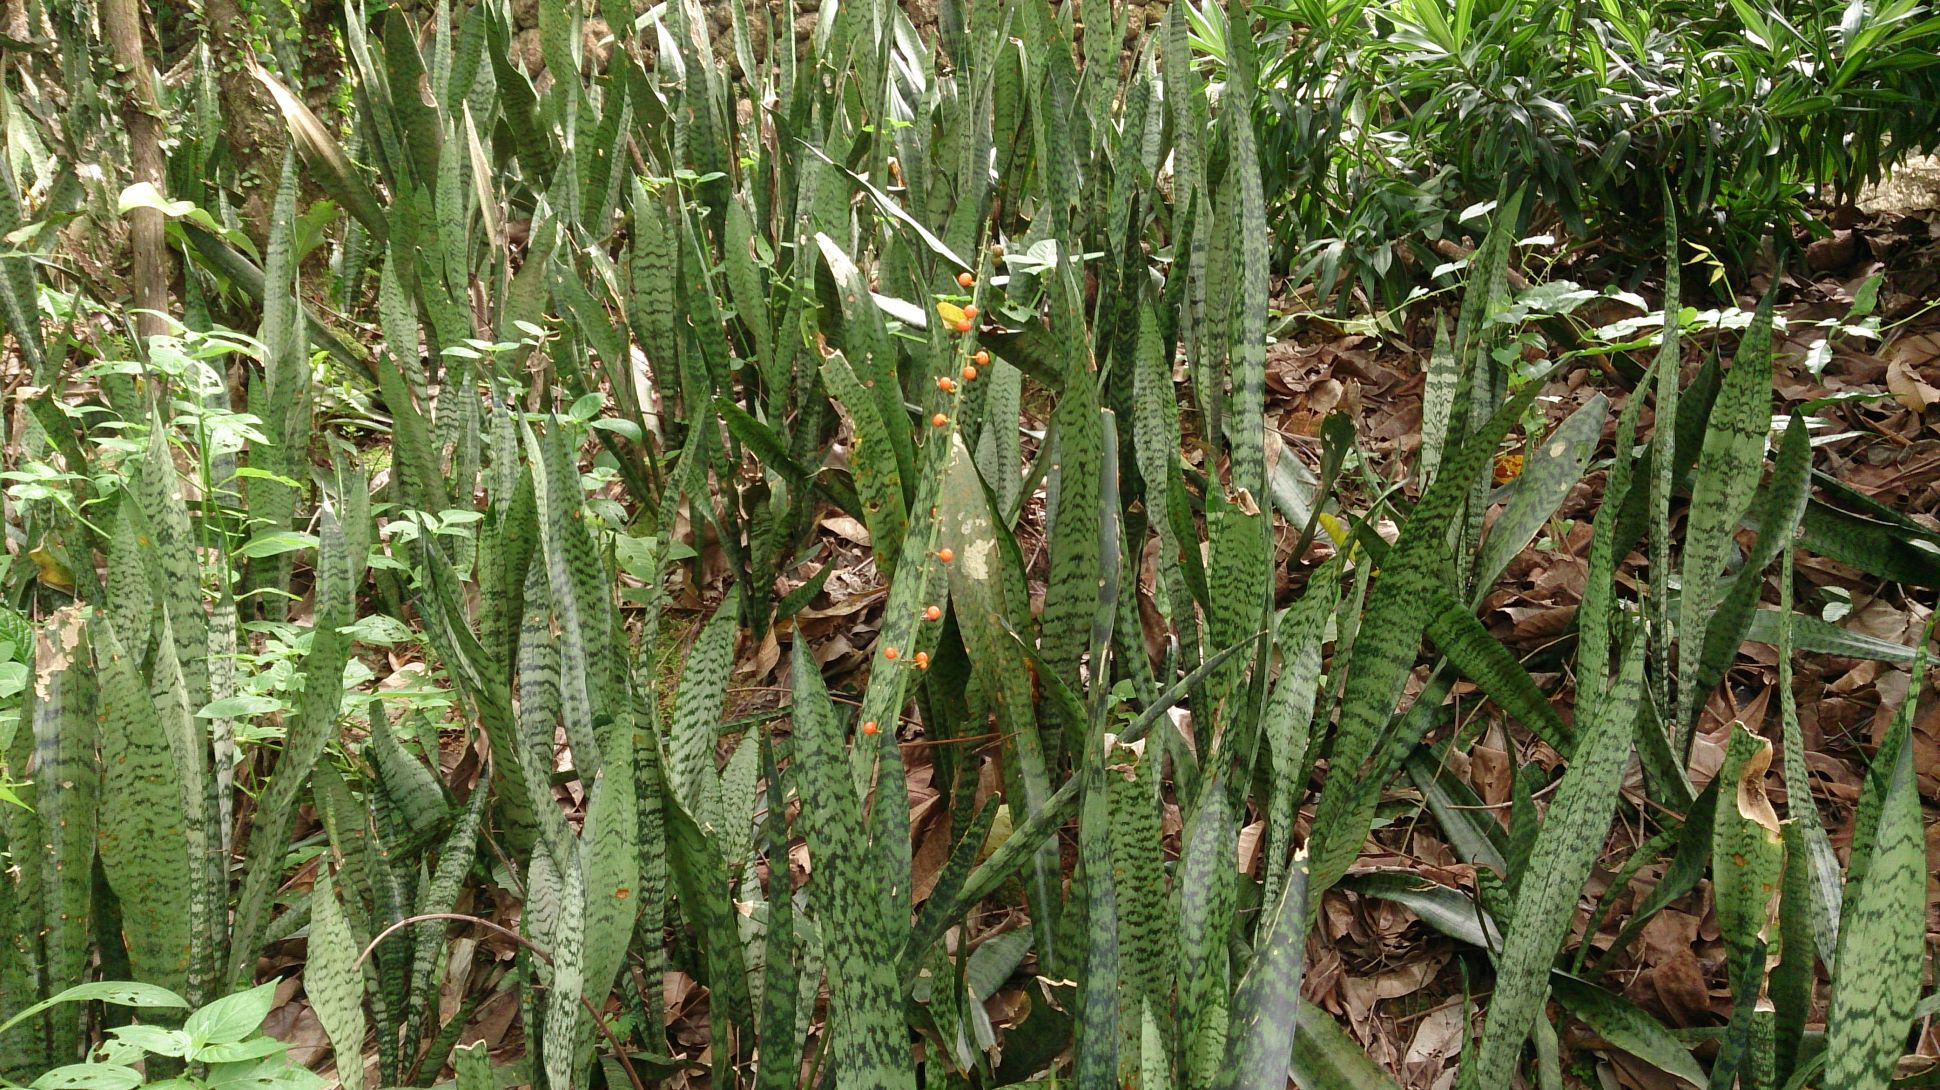 Many thin green snake plant leaves growing on a forest floor, with small orange berries